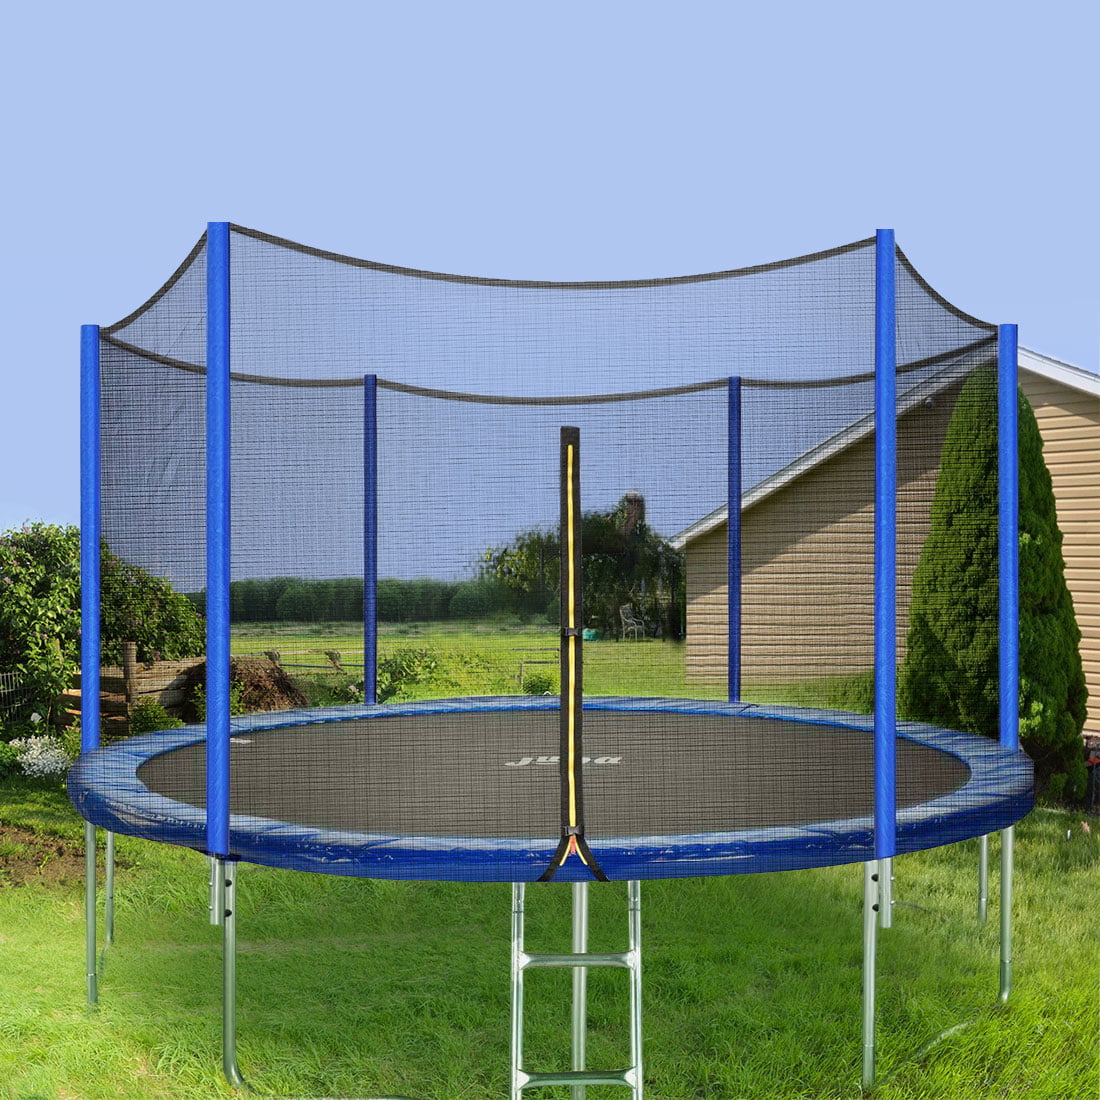 15ft 12 Ft Enclosure Trampoline With Net Basketball Recreational Trampoline Jump Bounce For Adults Kids Backyard Trampoline With Mat Spring Pads With Ladder Sports Outdoors Sports Fitness